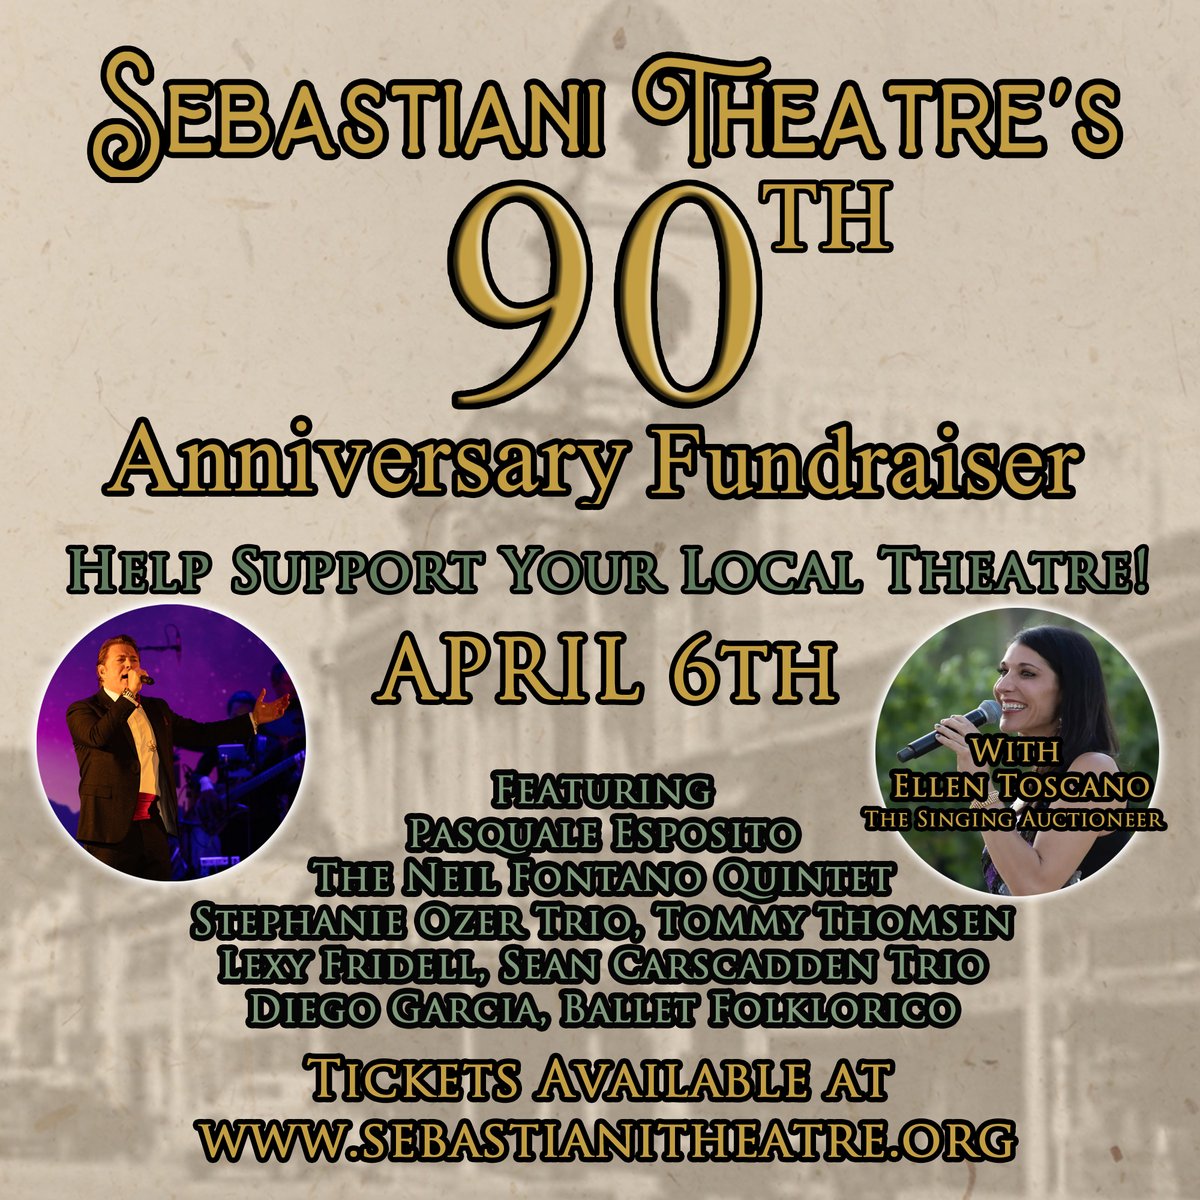 Get your tickets to support our historic SIFF venue partner @thesebastiani, celebrating 90 years of bringing the magic of film and engaging community events to Sonoma. The anniversary variety show is tomorrow night at 5:30. Tickets and more info at sebastianitheatre.com.